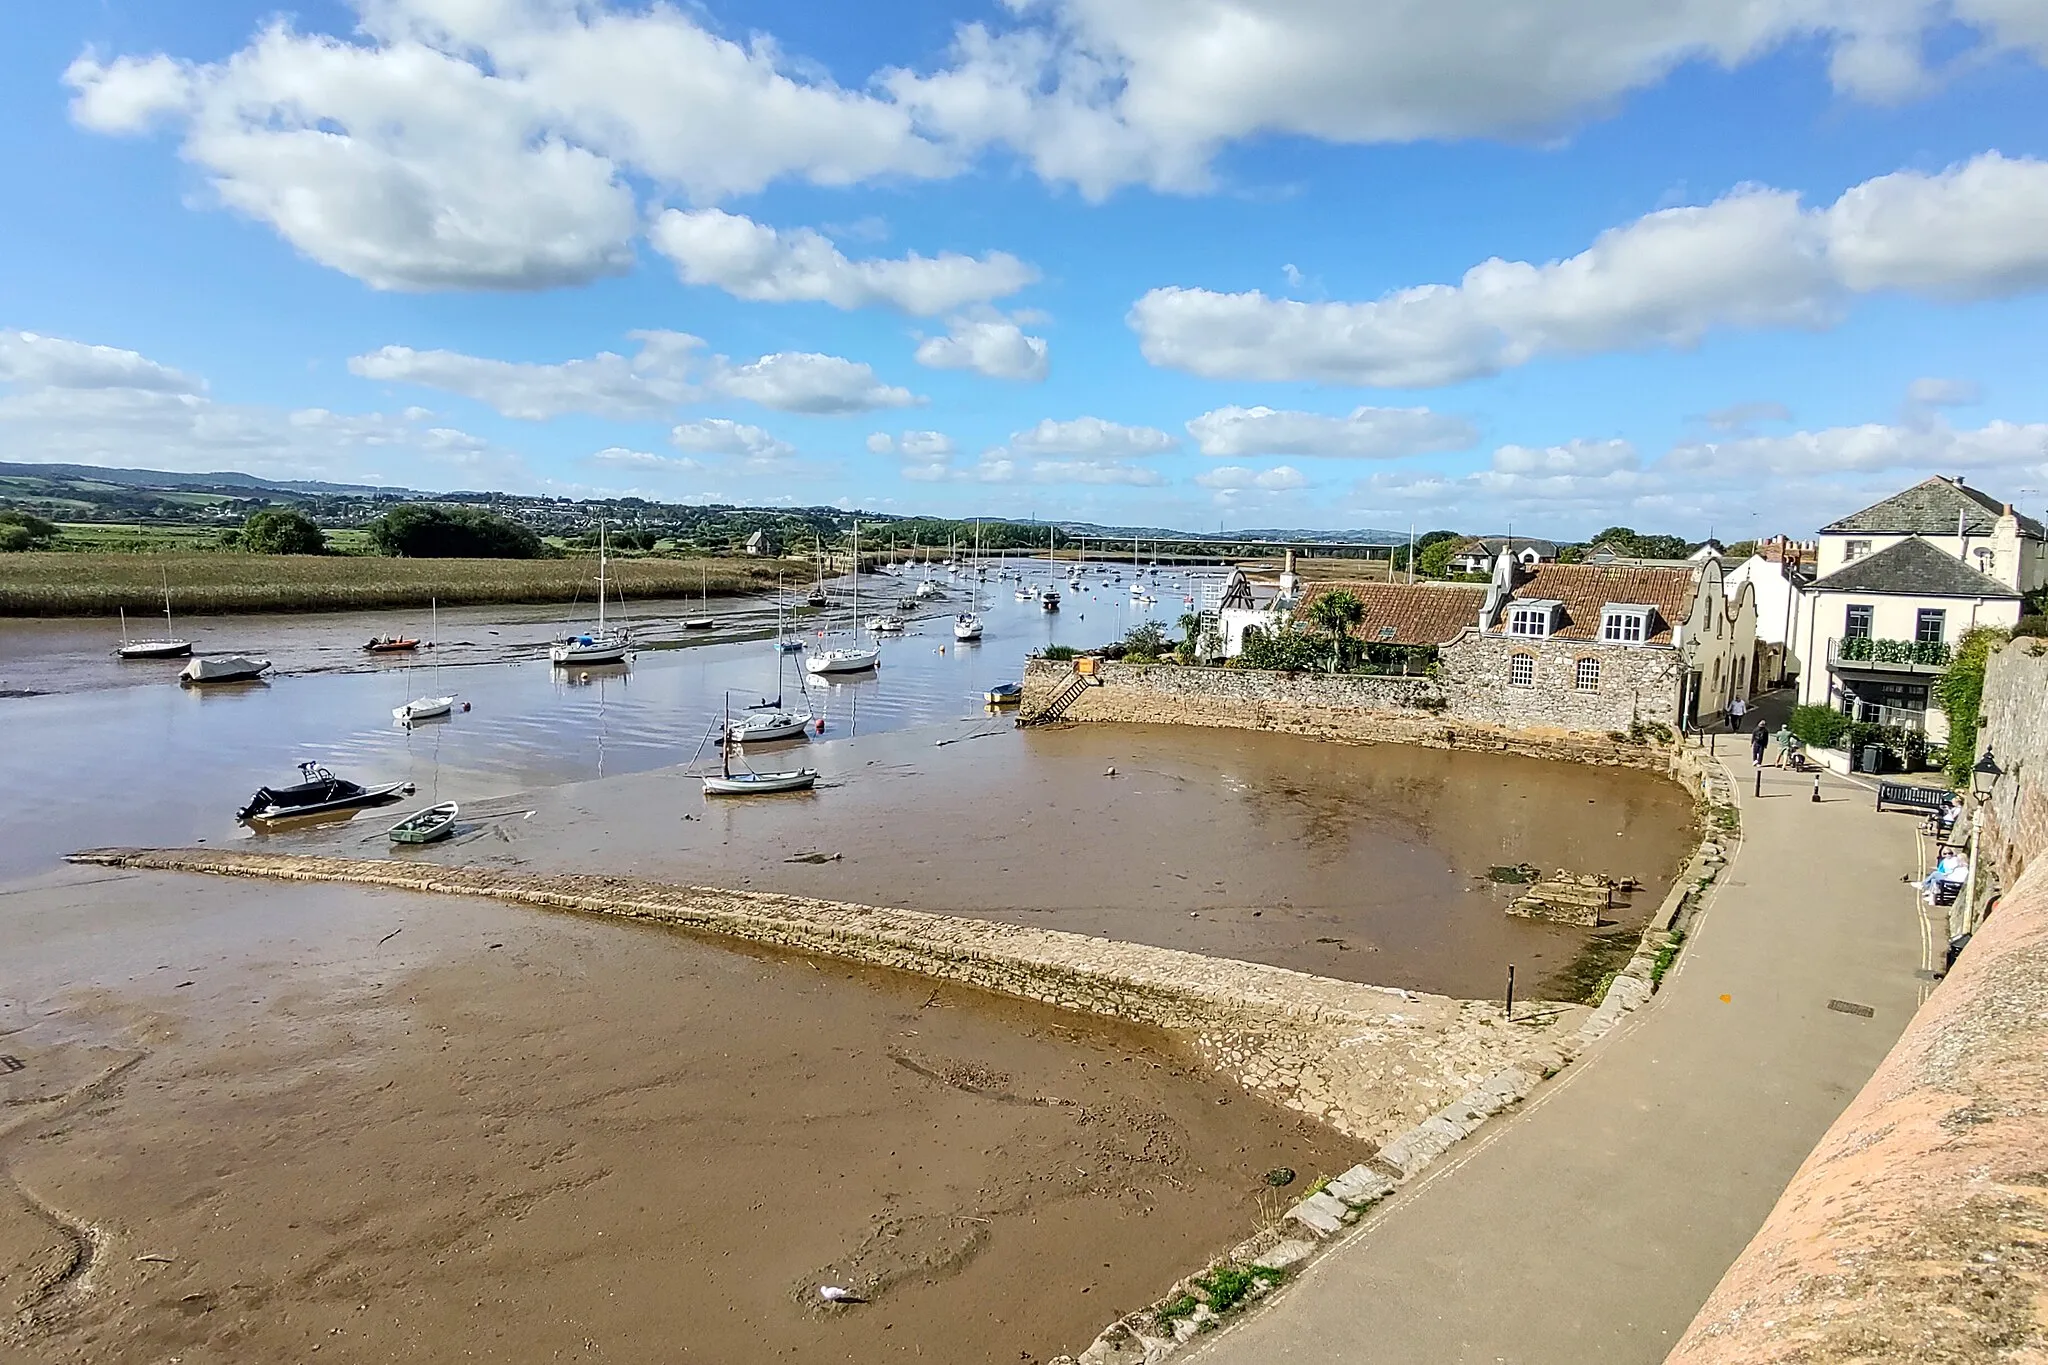 Photo showing: A quintessential view of Topsham, Devon - yachts on the River Exe, and the Wixels house.